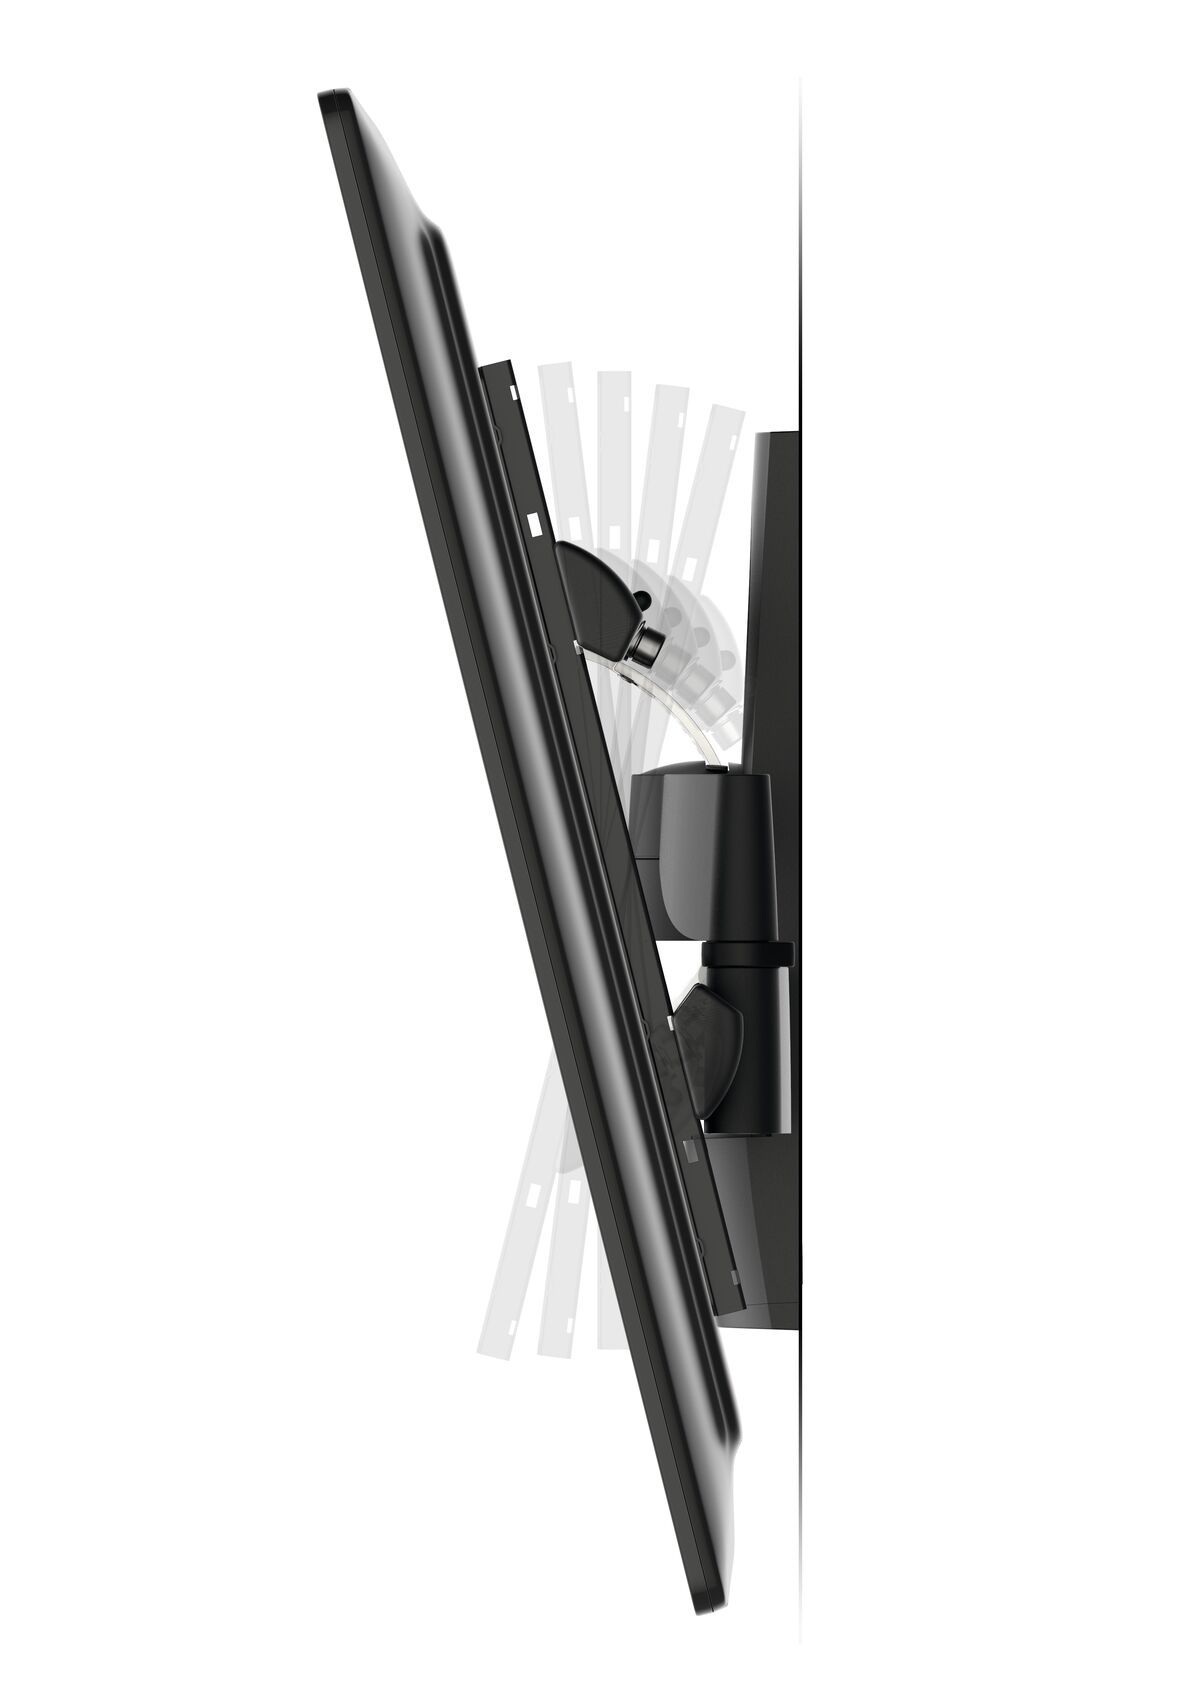 Vogel's WALL 2350 Full-Motion TV Wall Mount - Suitable for 40 up to 65 inch TVs - Motion (up to 120°) - Tilt up to 15° - Detail